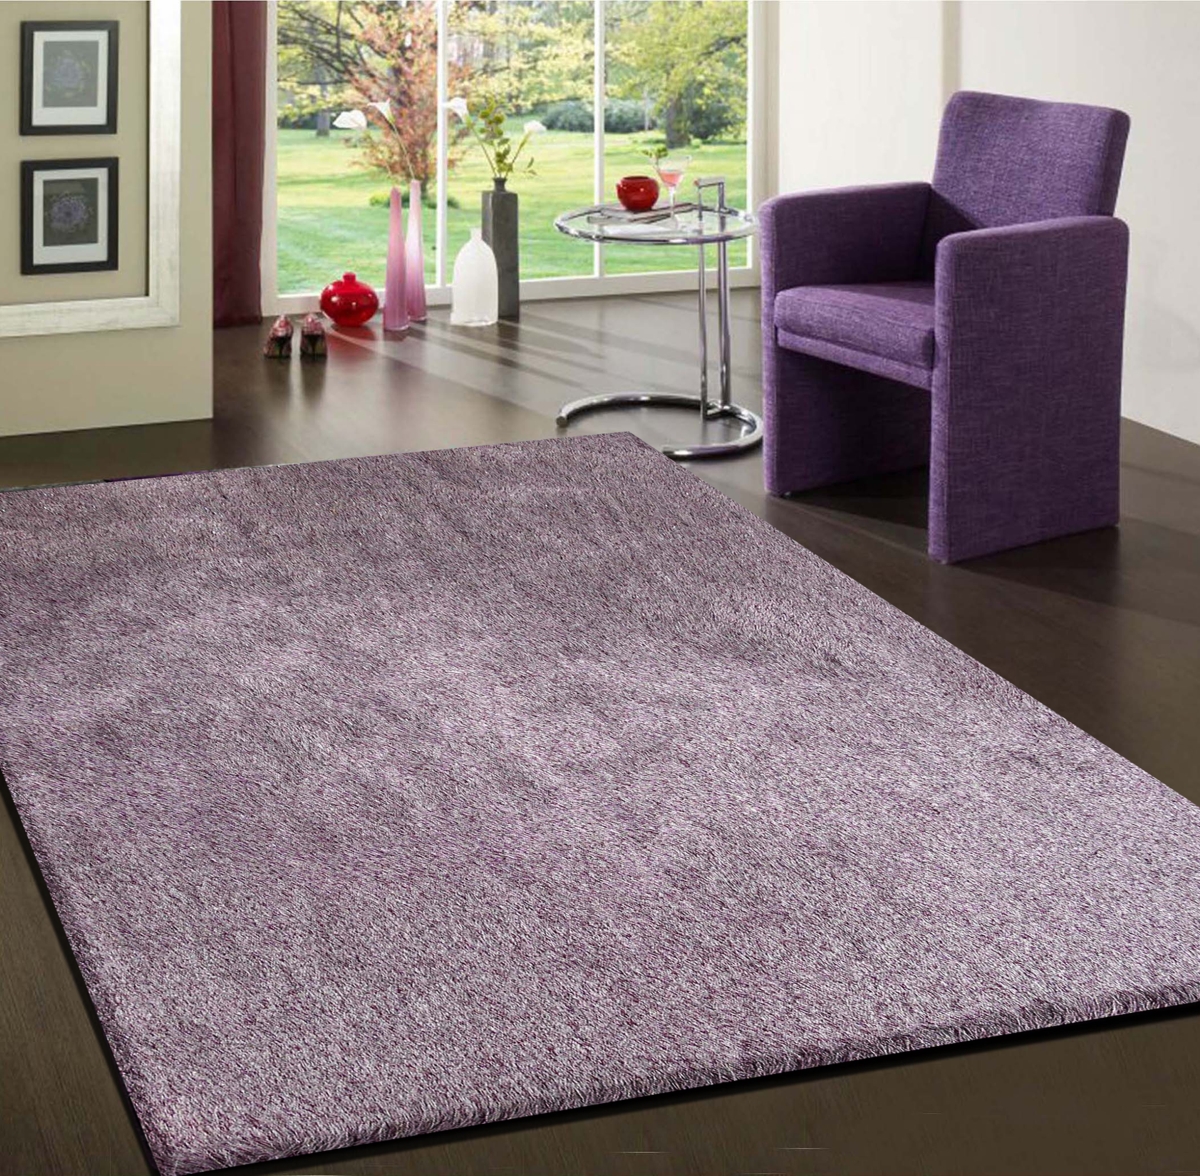 Picture of Amazing Rugs NL1005-811 8 x 11 ft. Fancy Shaggy Hand Tufted Area Rug in Purple